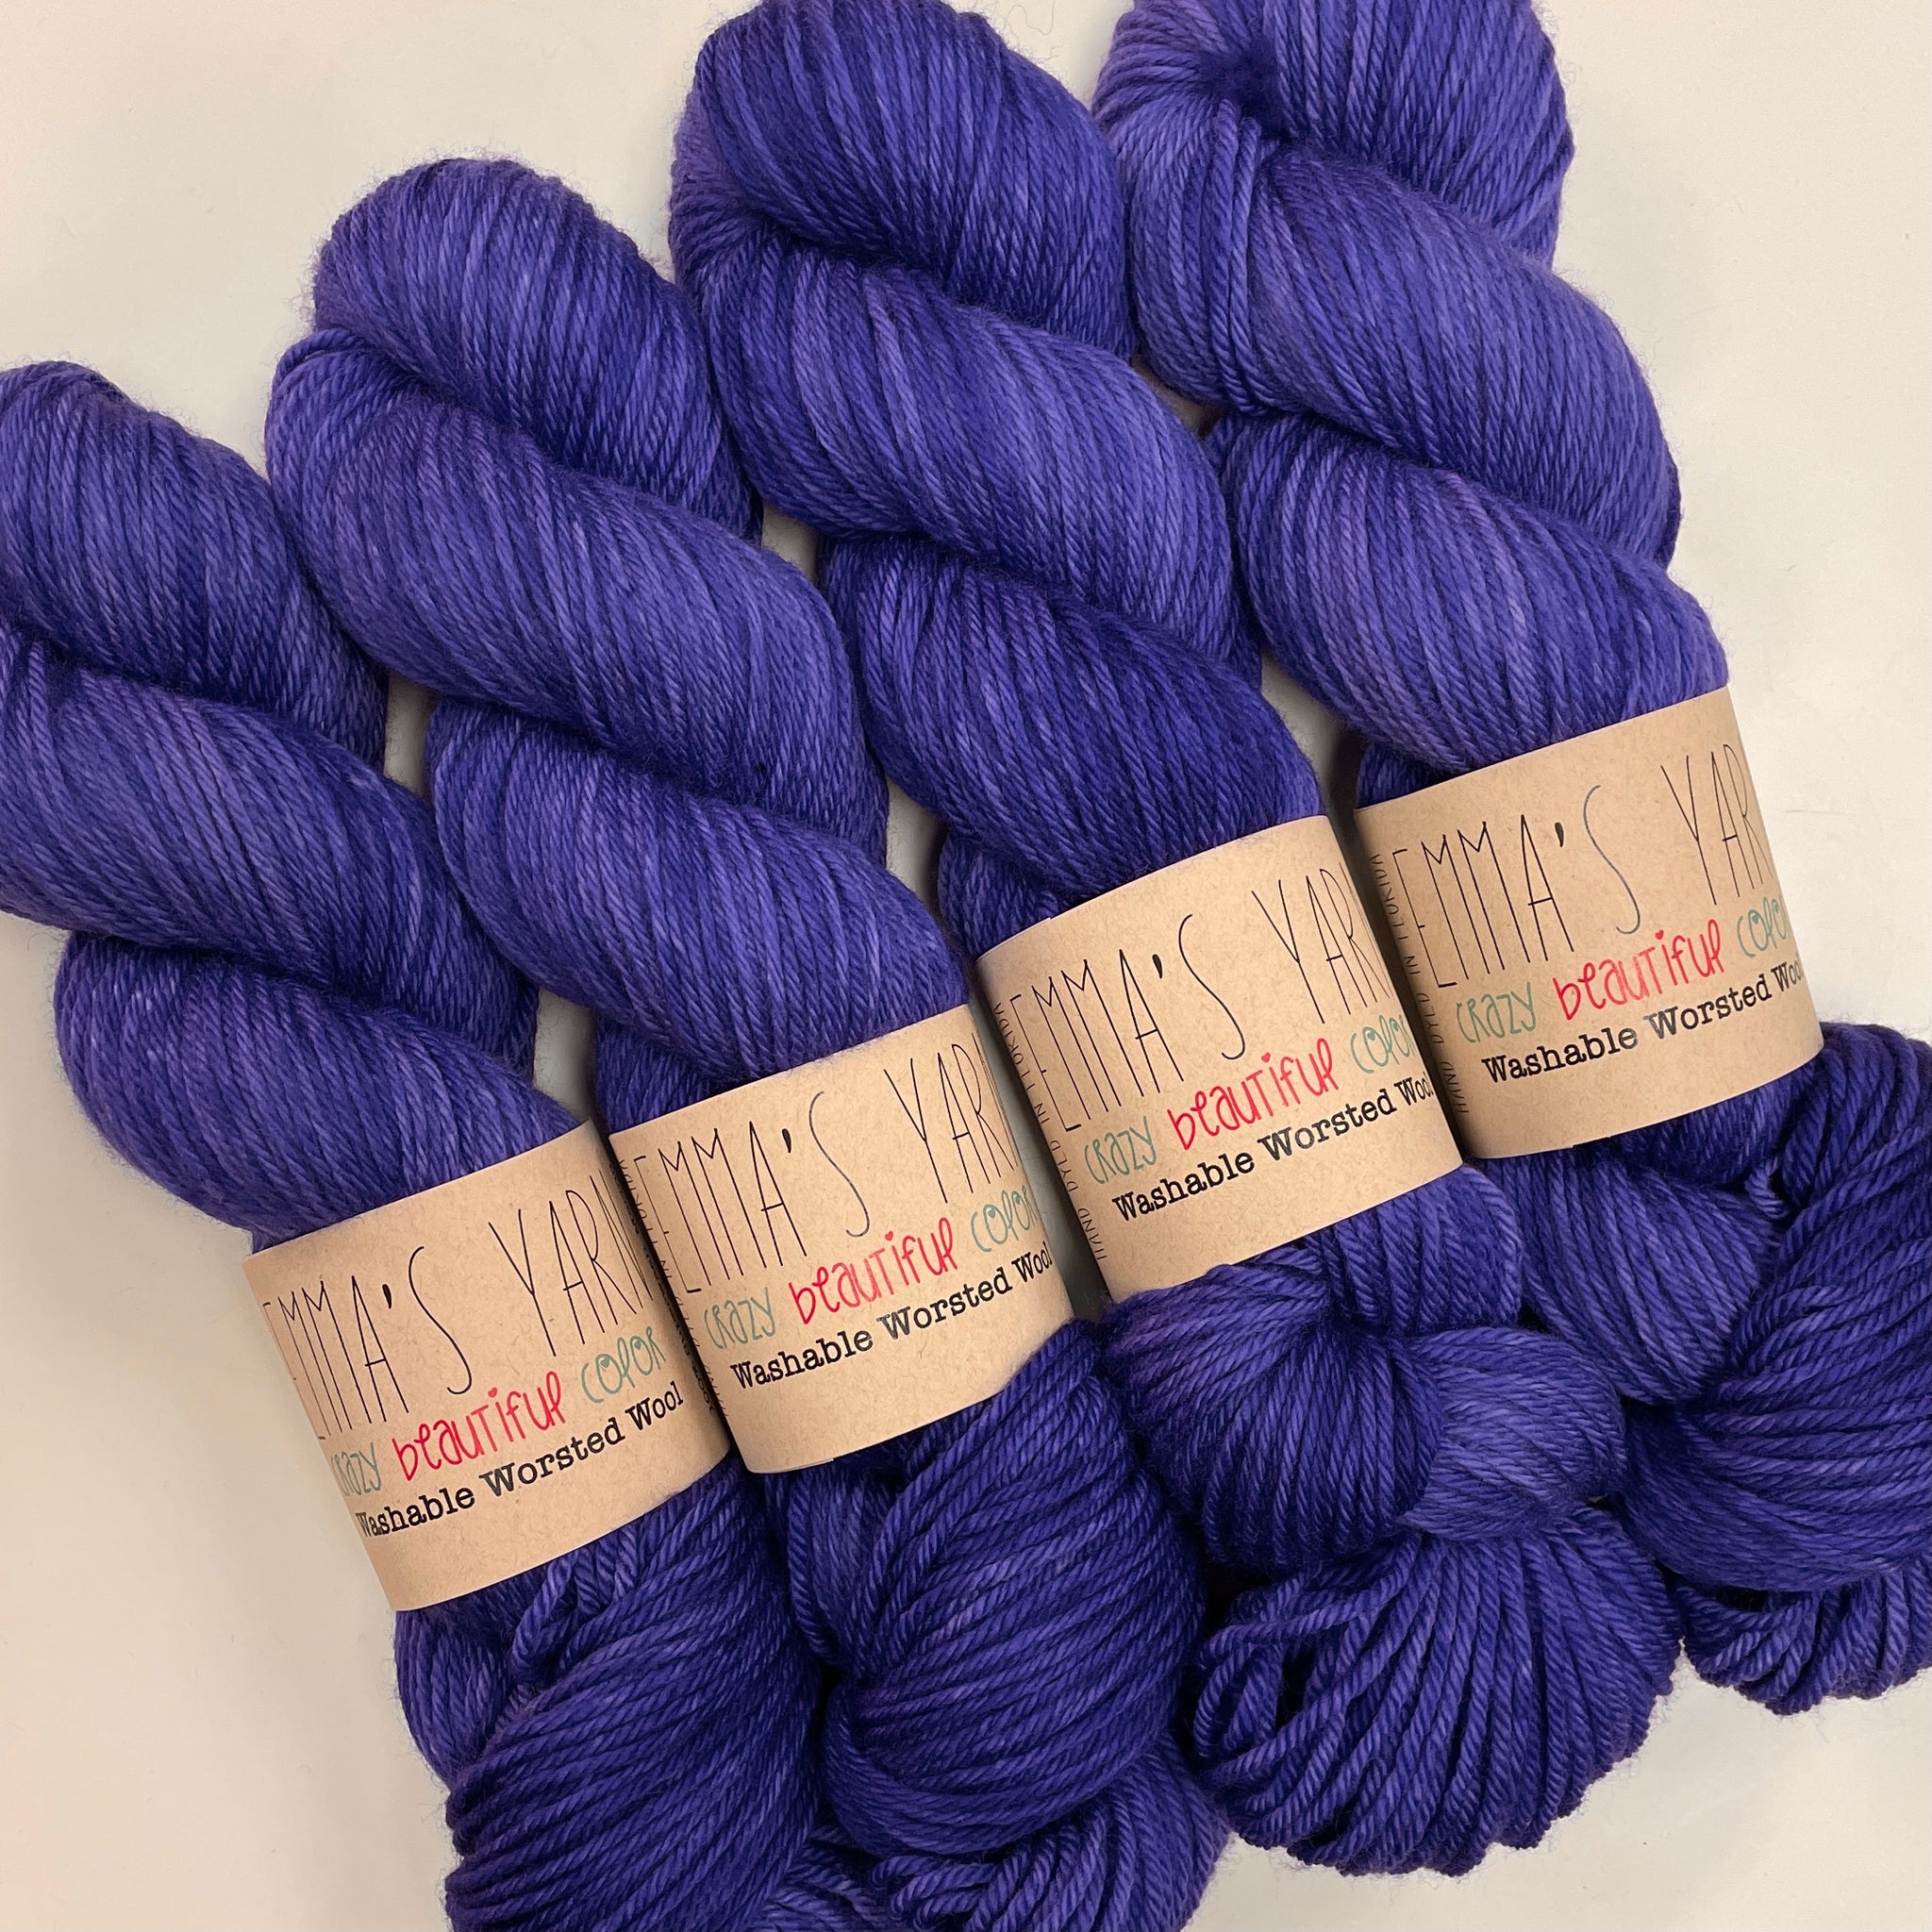 Fame & Fortune - Washable Worsted Wool